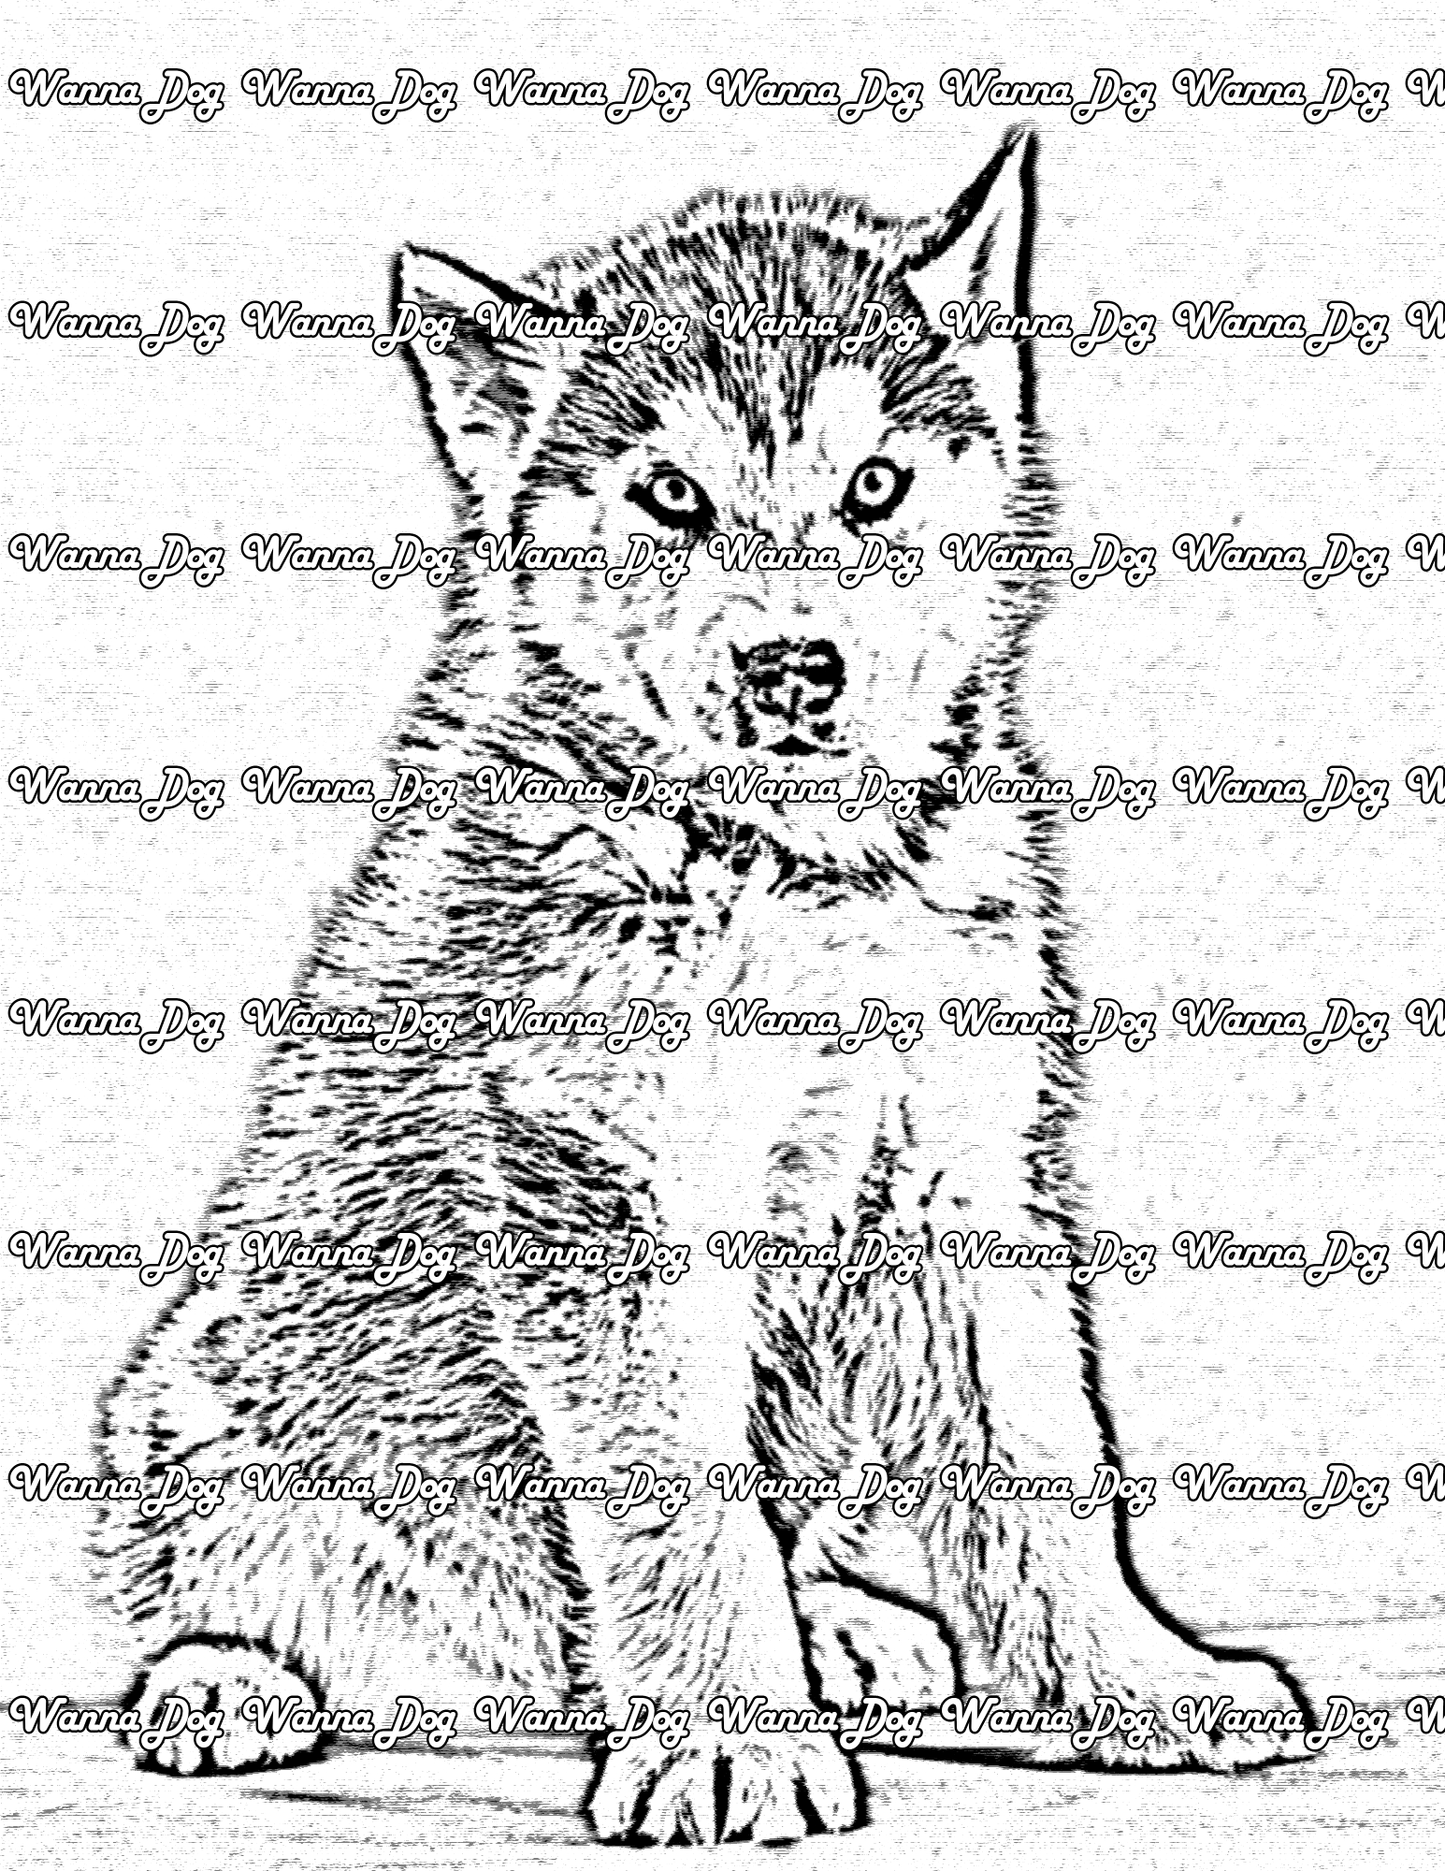 Husky Puppy Coloring Page of a Husky Puppy sitting and chilling out